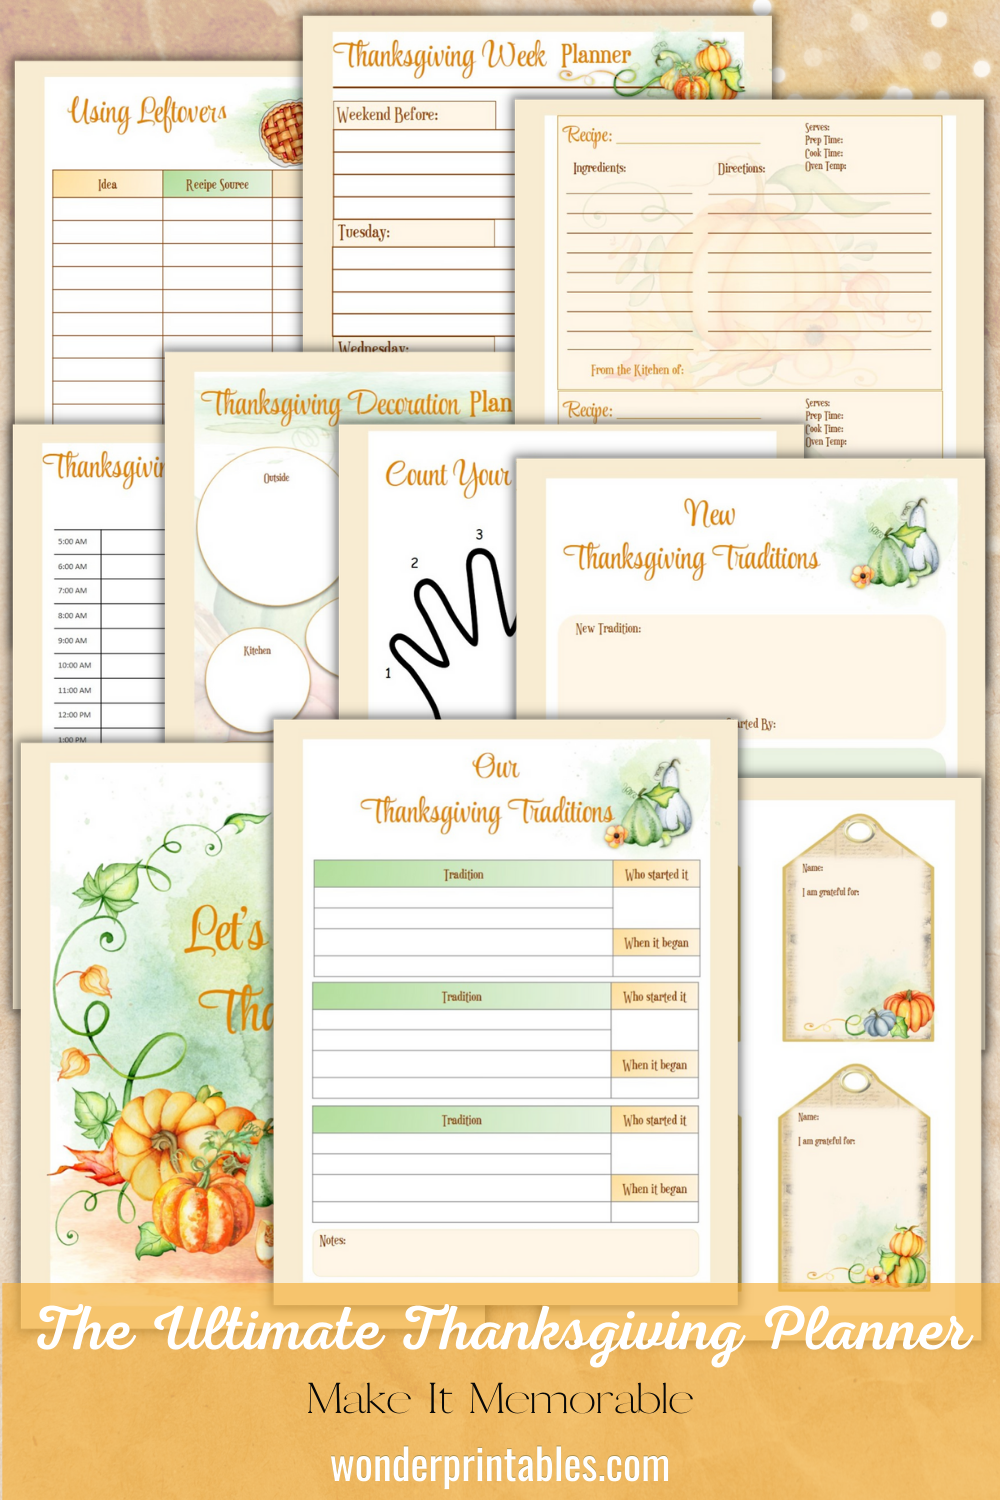 The Ultimate Thanksgiving Planner